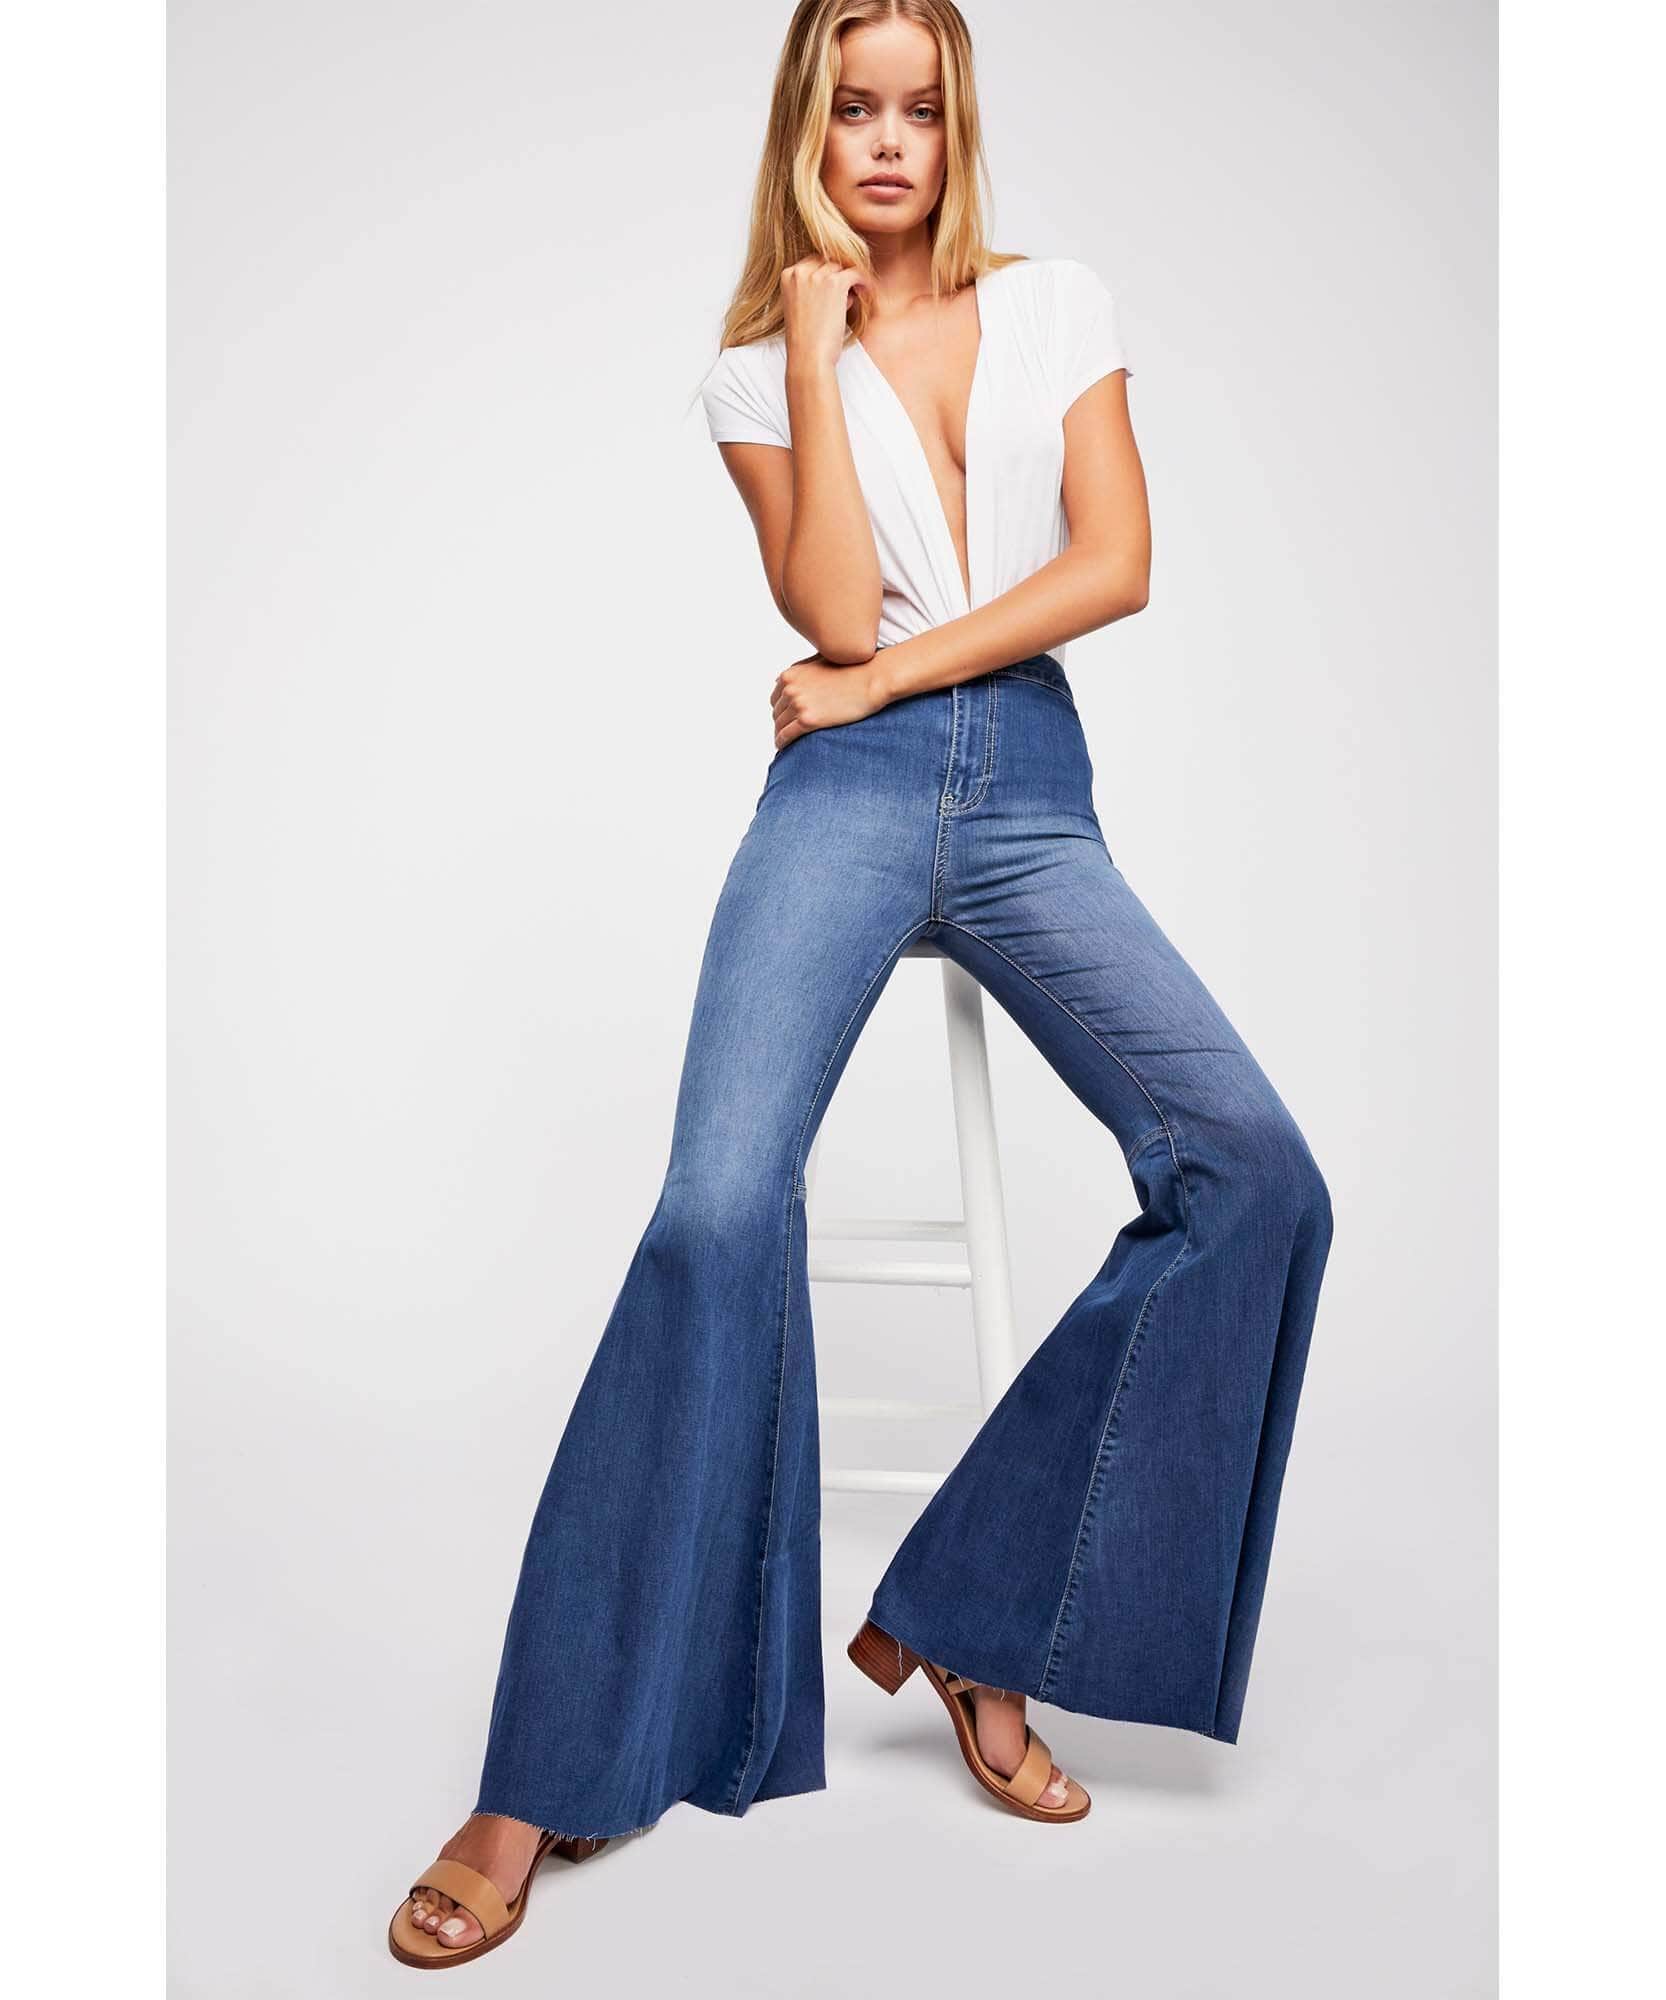 Free People We The Free Just Float On Flare Jeans in Indigo Combo Size 24